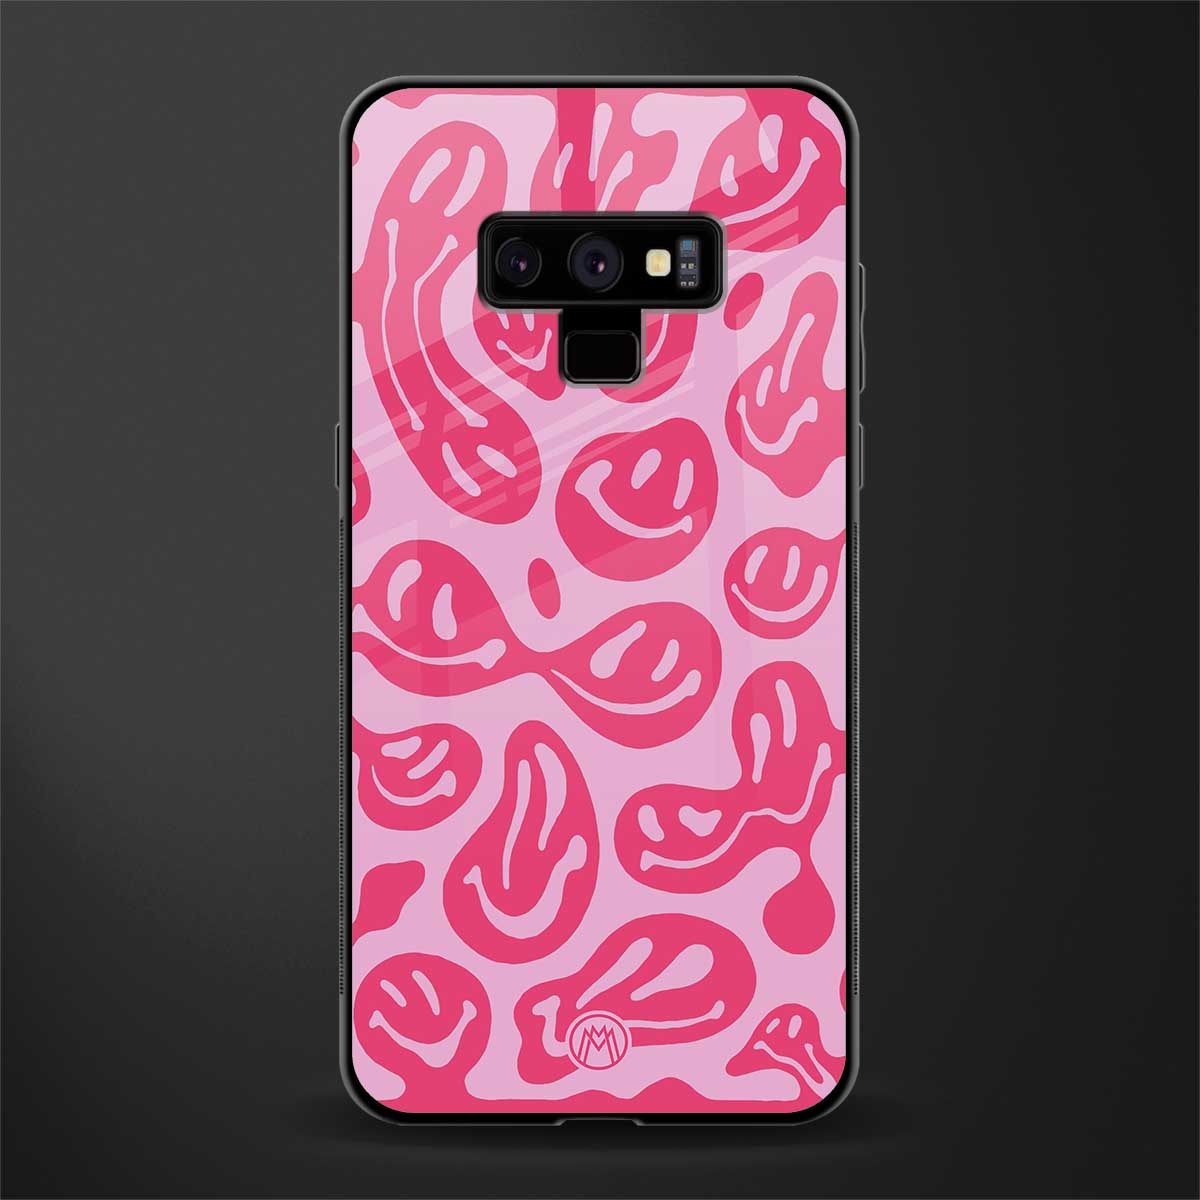 acid smiles bubblegum pink edition glass case for samsung galaxy note 9 image